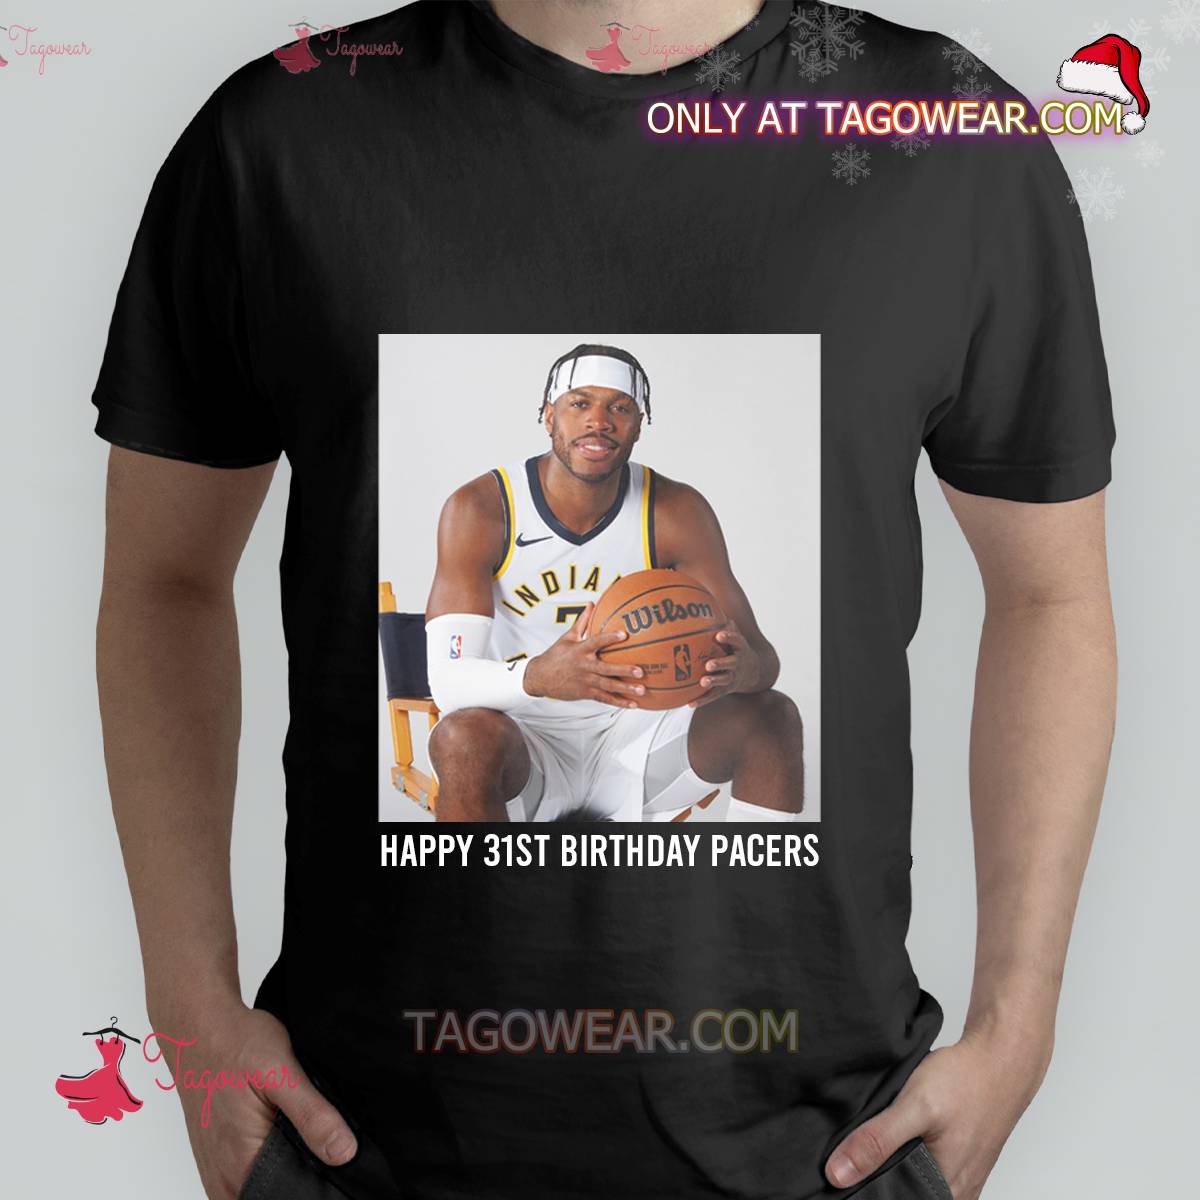 Happy 31st Birthday Pacers Shirt a